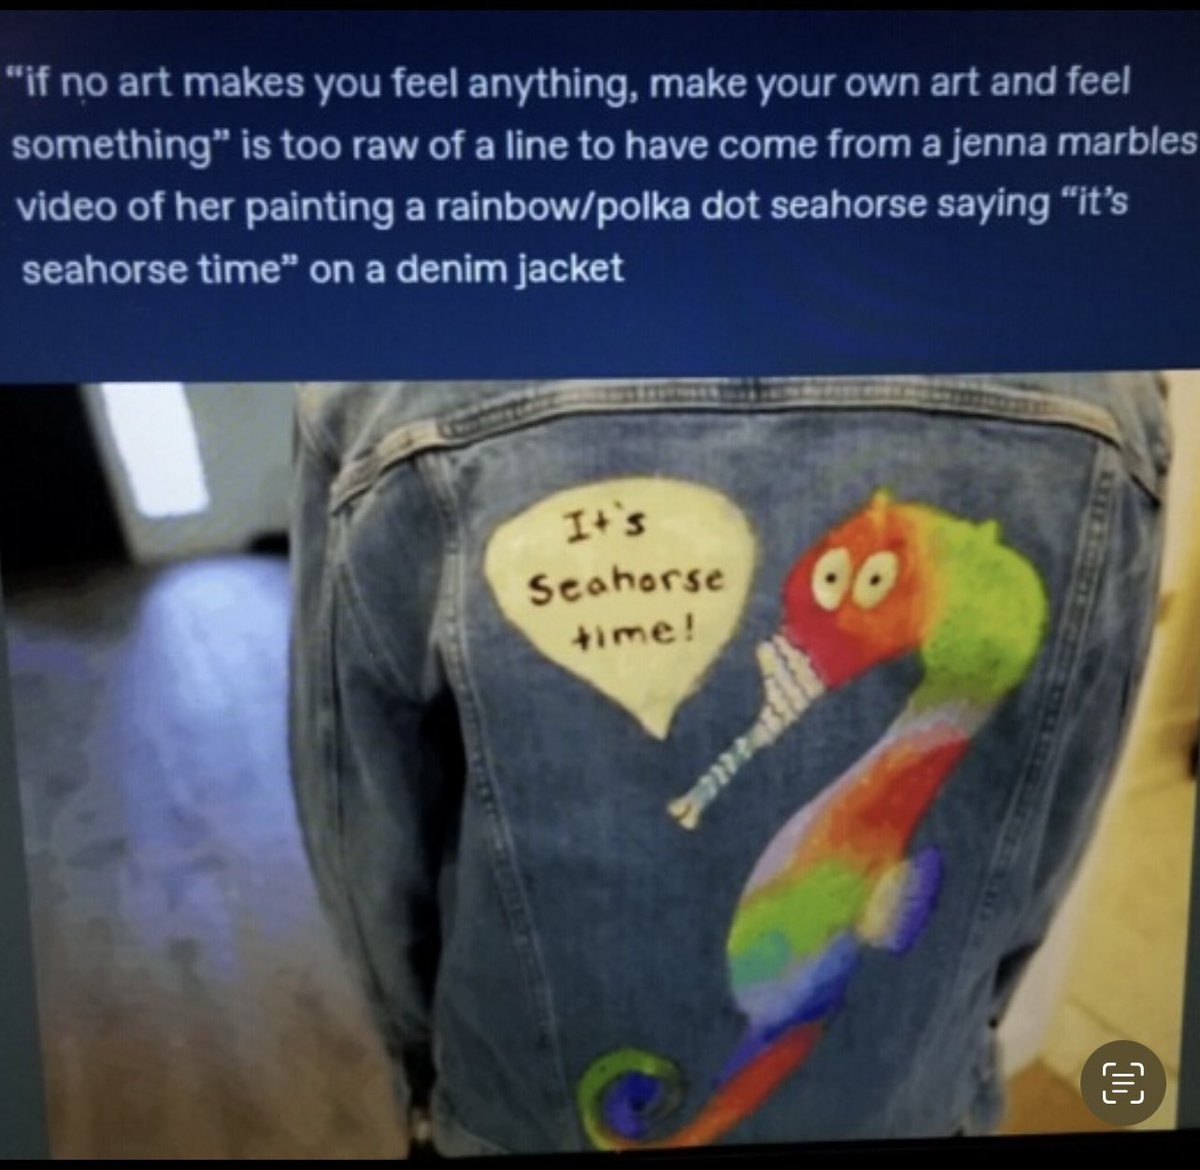 *if no art makes you feel anything, make your own art and feel something' #jennamarbles